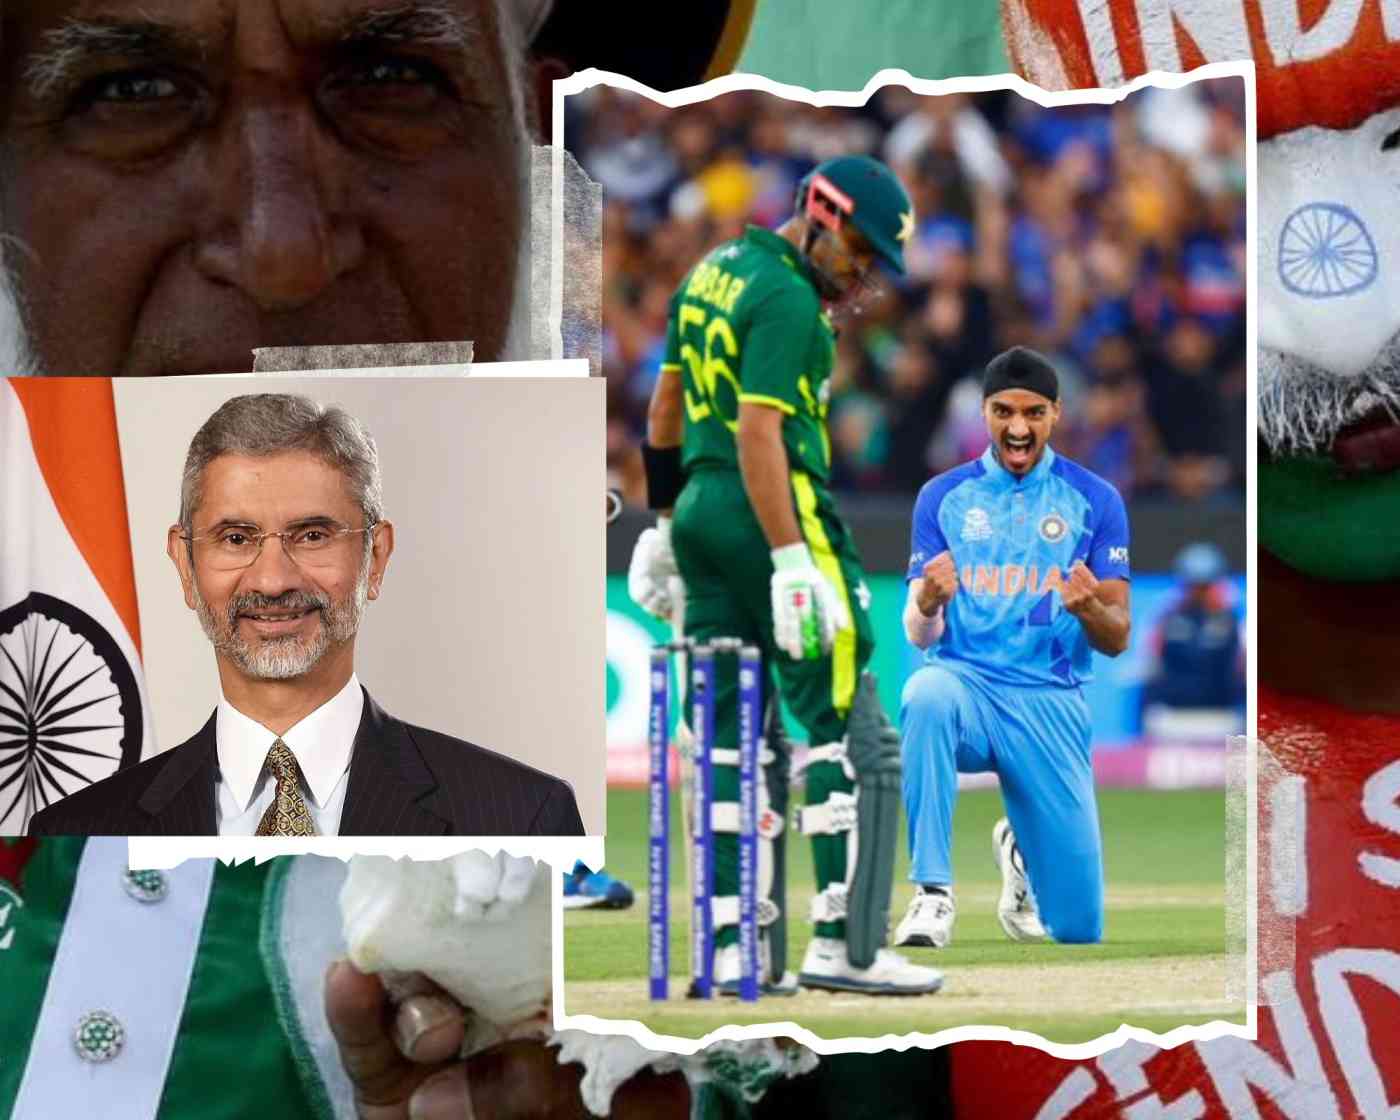 India's foreign Minister S Jaishankar answers on a possible India-Pakistan cricket series